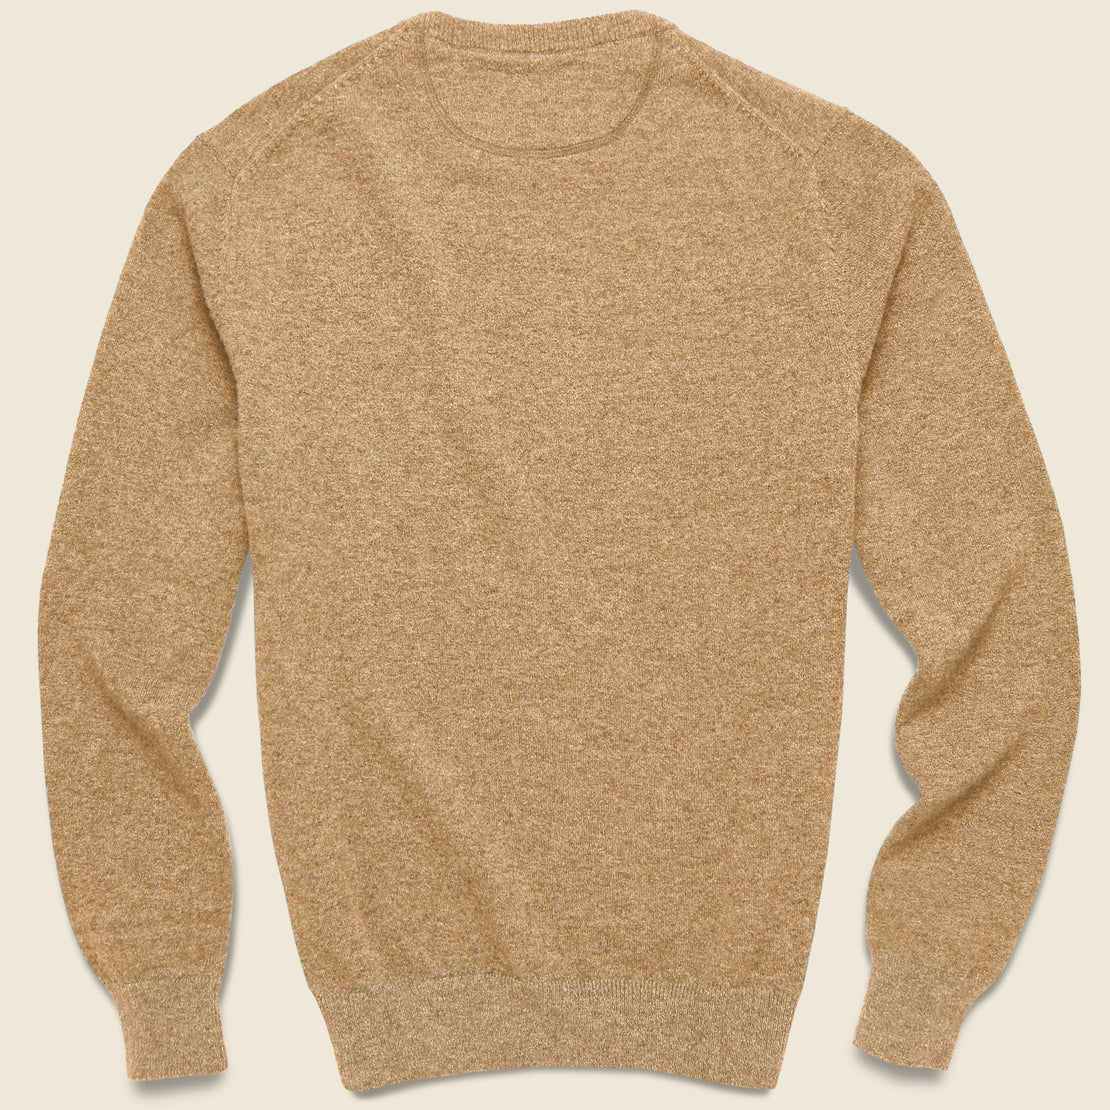 Jackson Crew Sweater - Wheat Heather - Faherty - STAG Provisions - Tops - Sweater